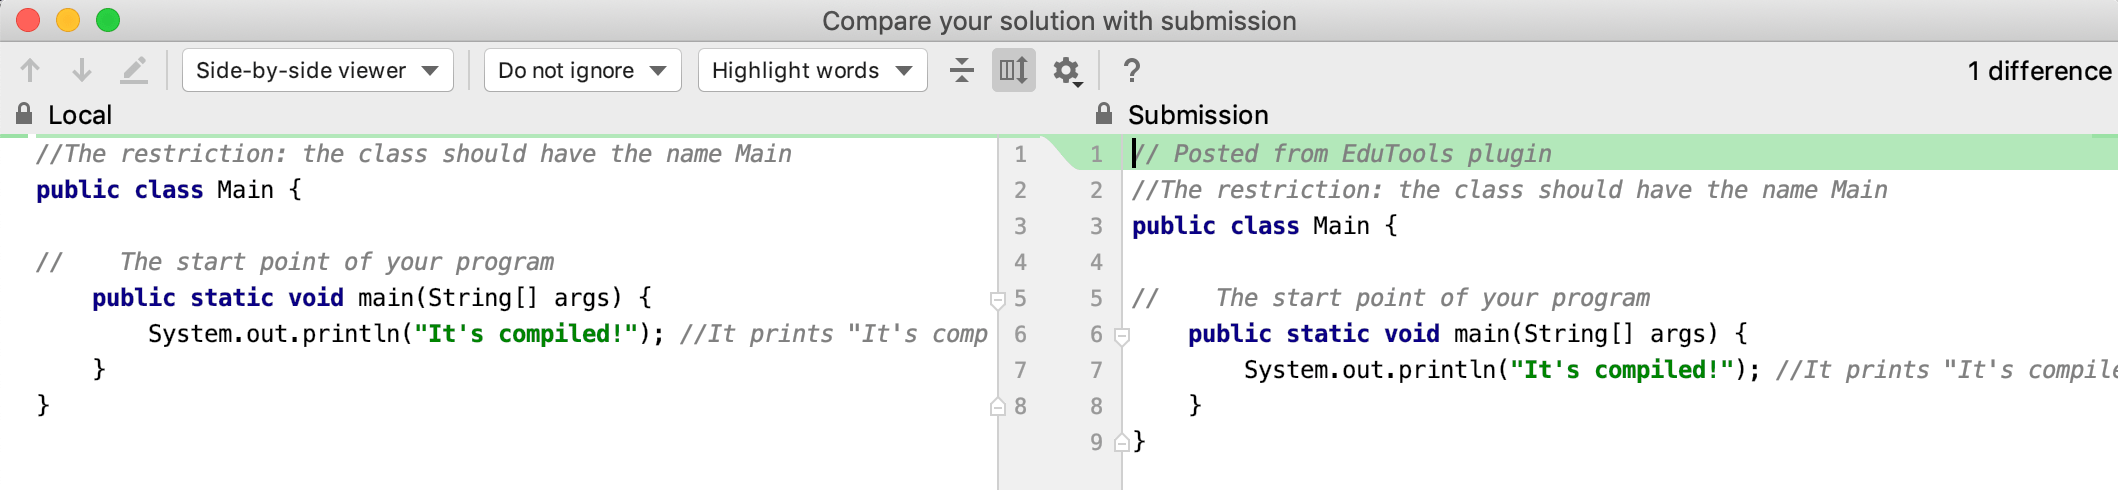 edu submissions diff java intro png